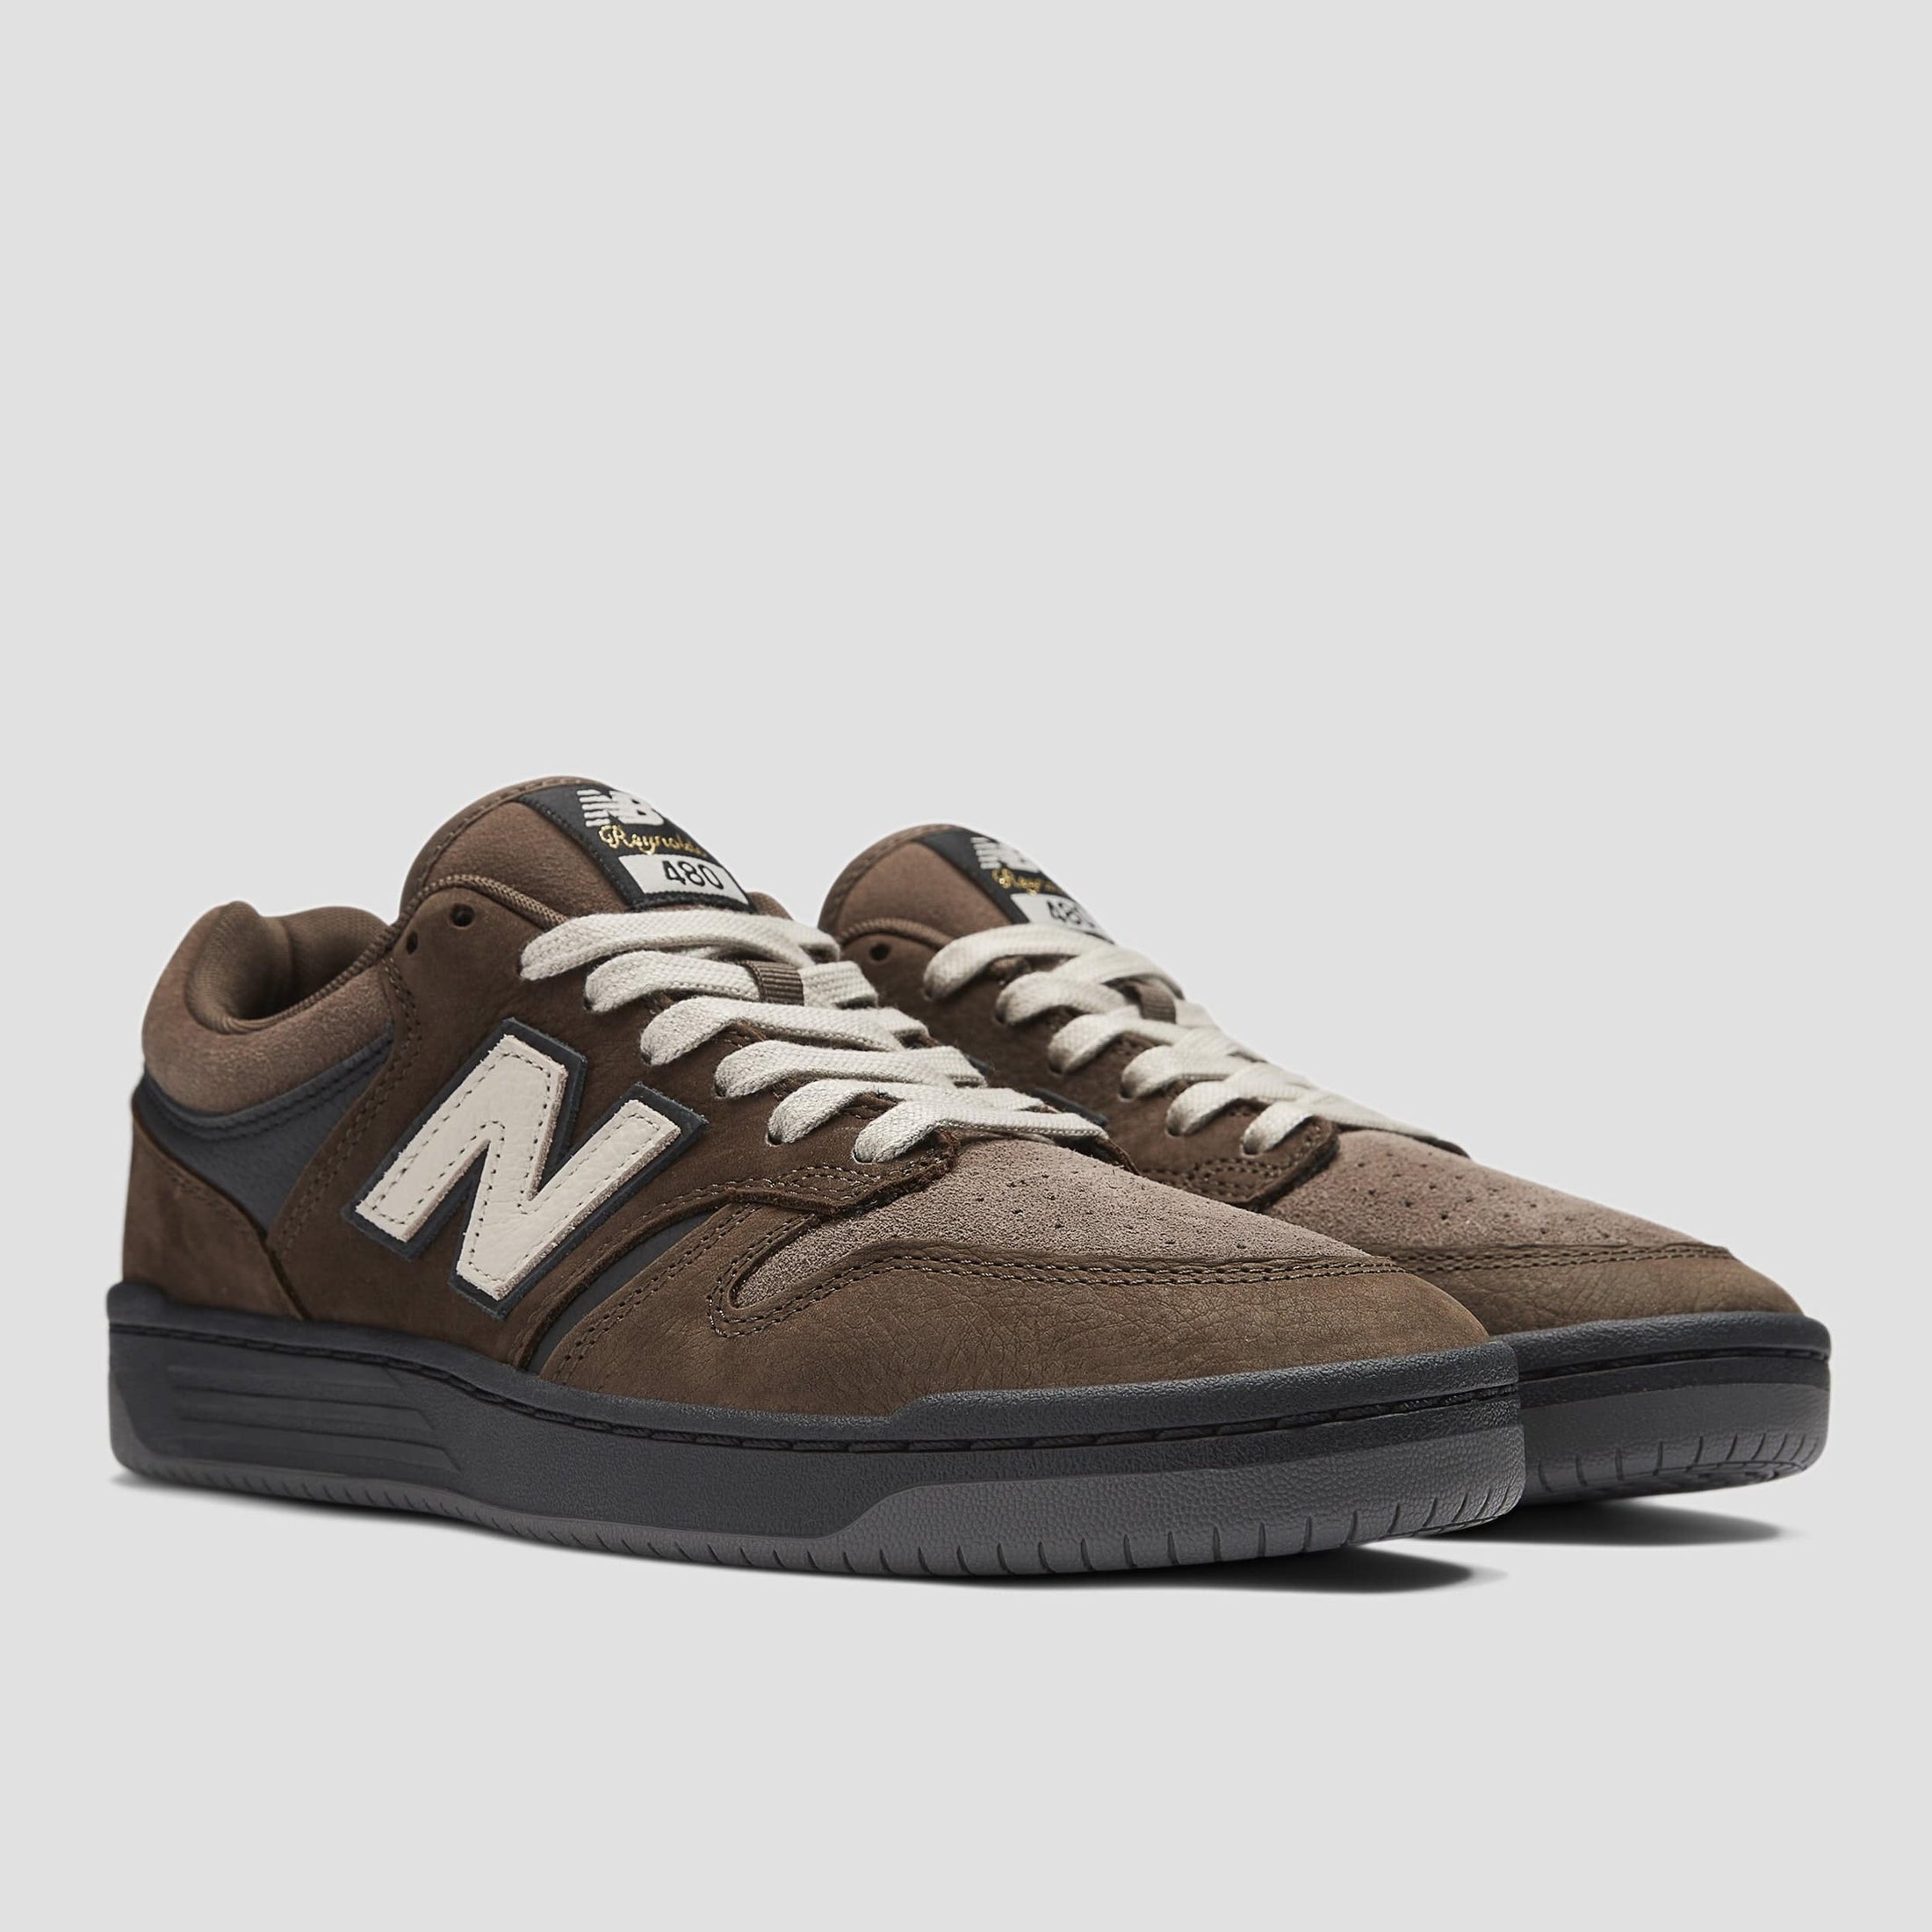 New Balance 480 Andrew Reynolds Shoes Chocolate